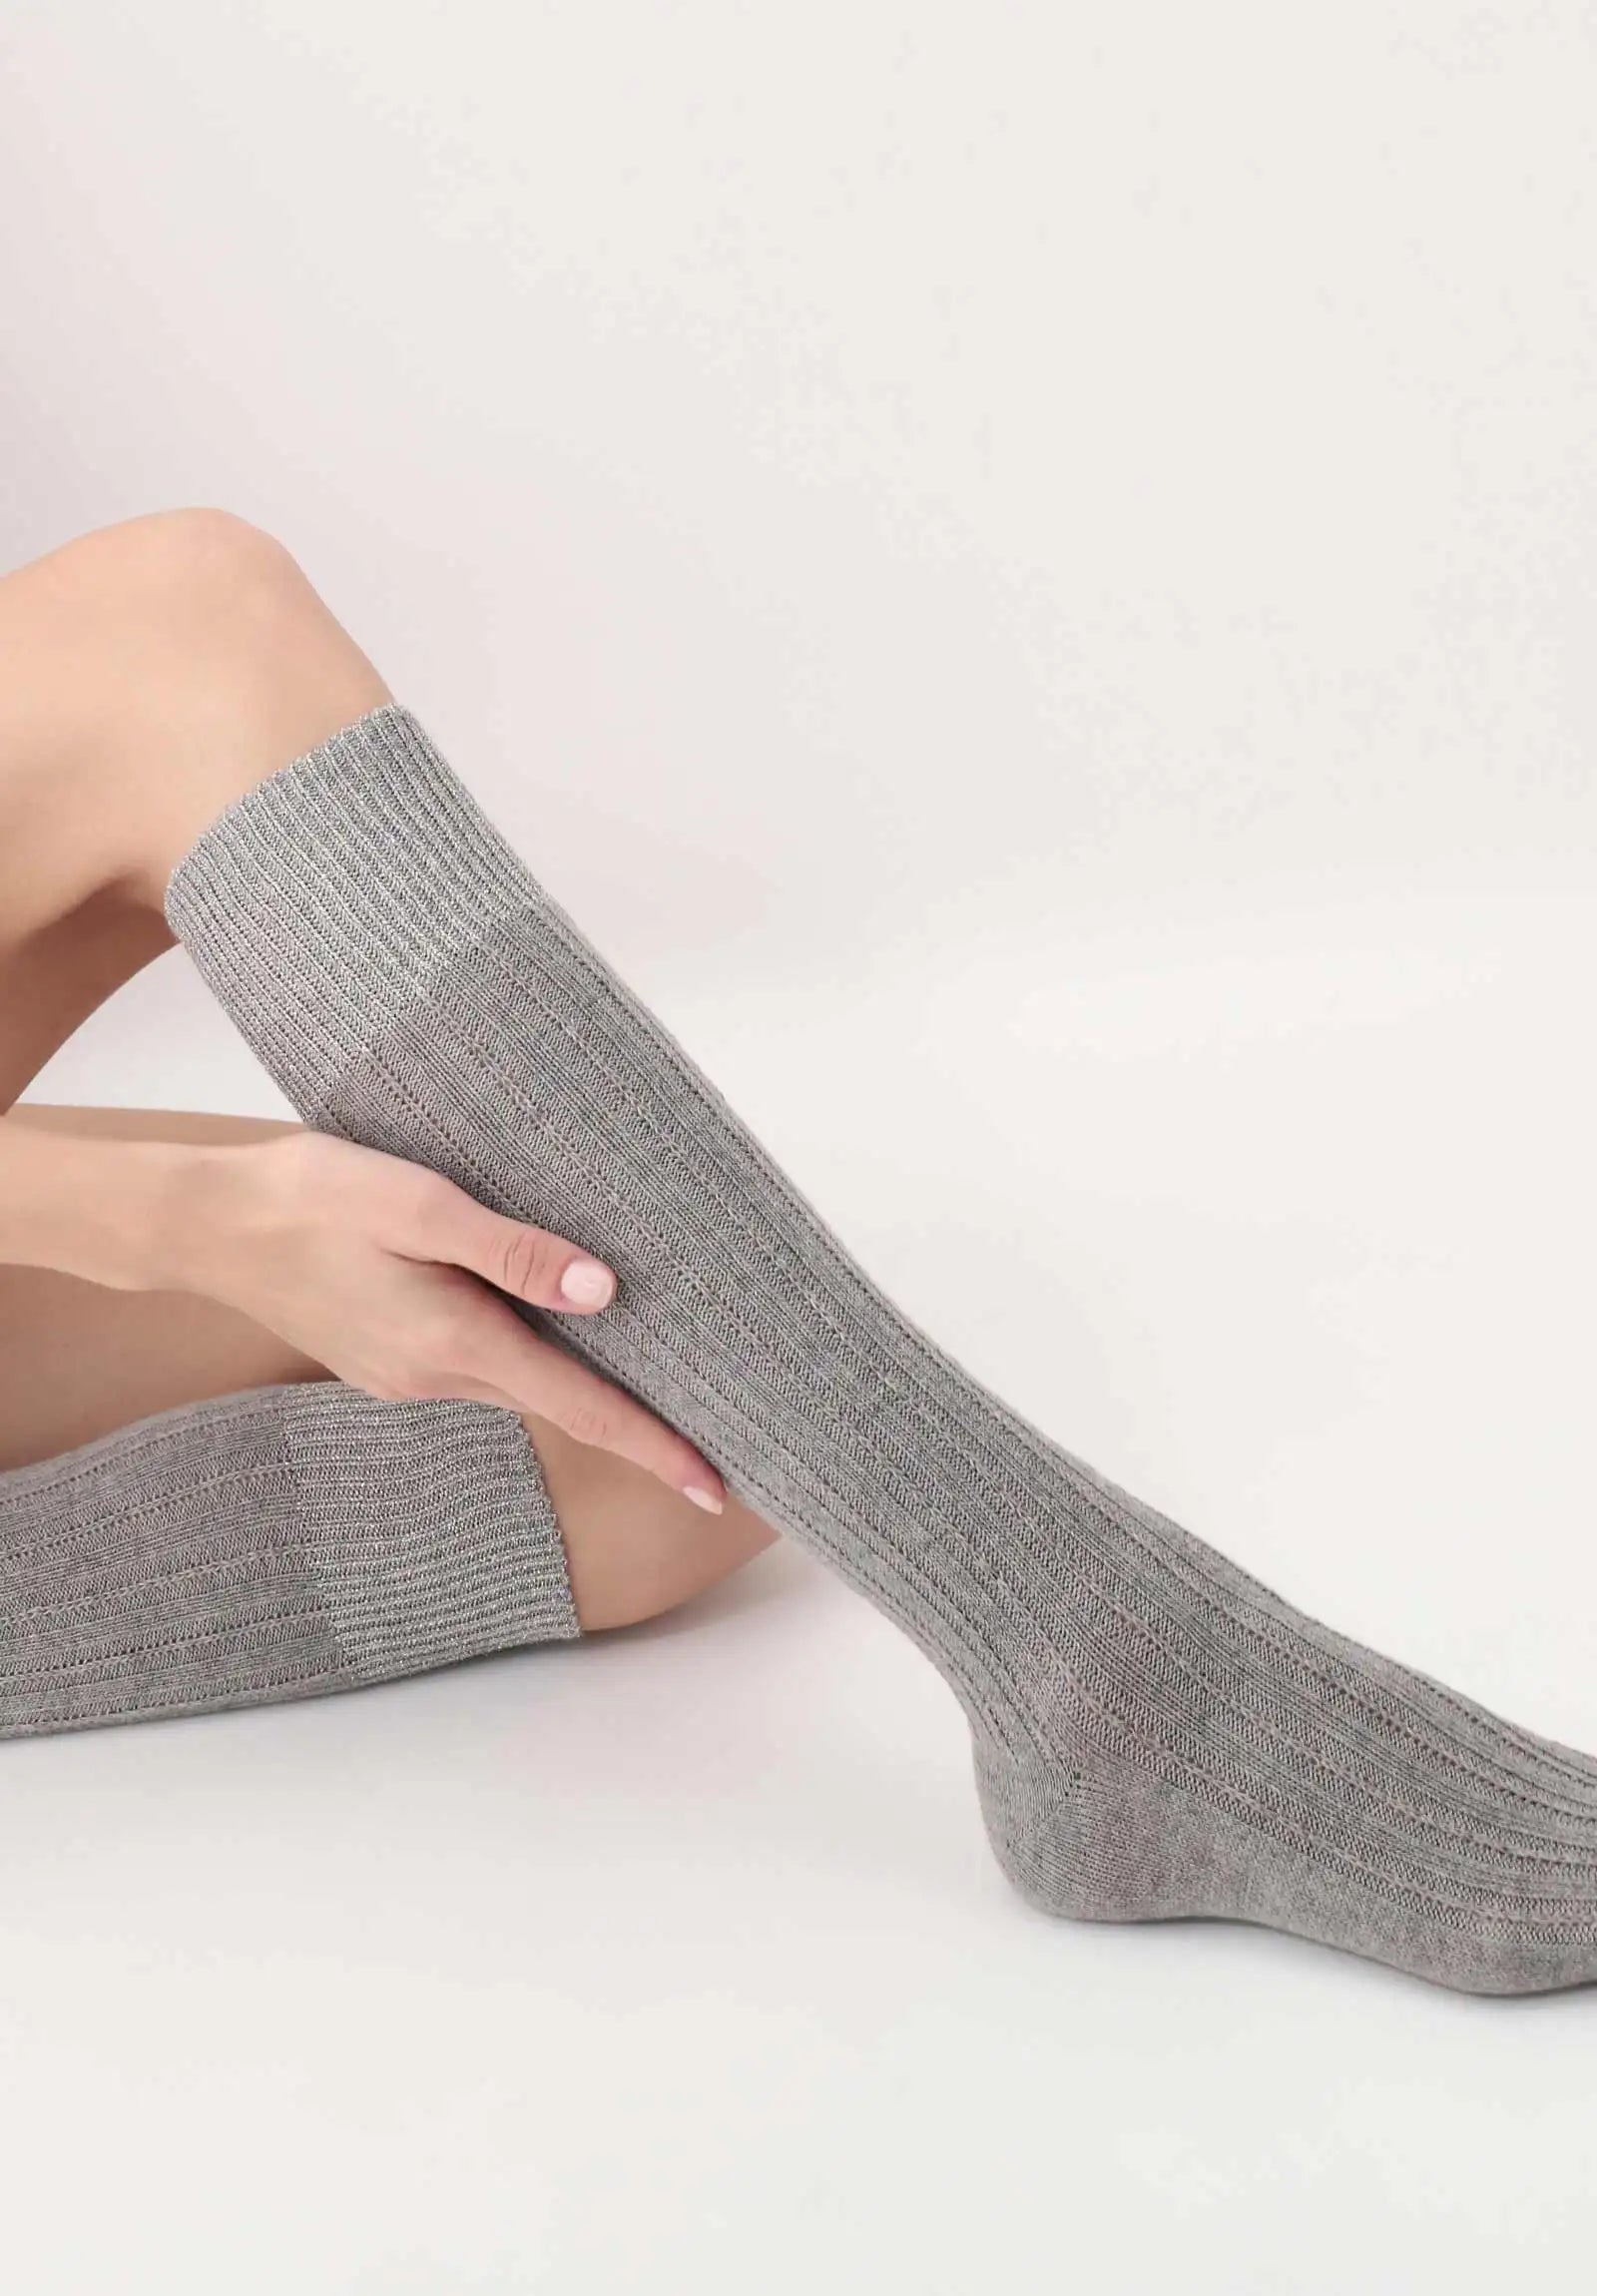 Oroblù Jasmine Knee Socks - Ultra soft and warm light grey ribbed knitted knee-high socks with a touch of alpaca, sparkly silver glitter cuff.